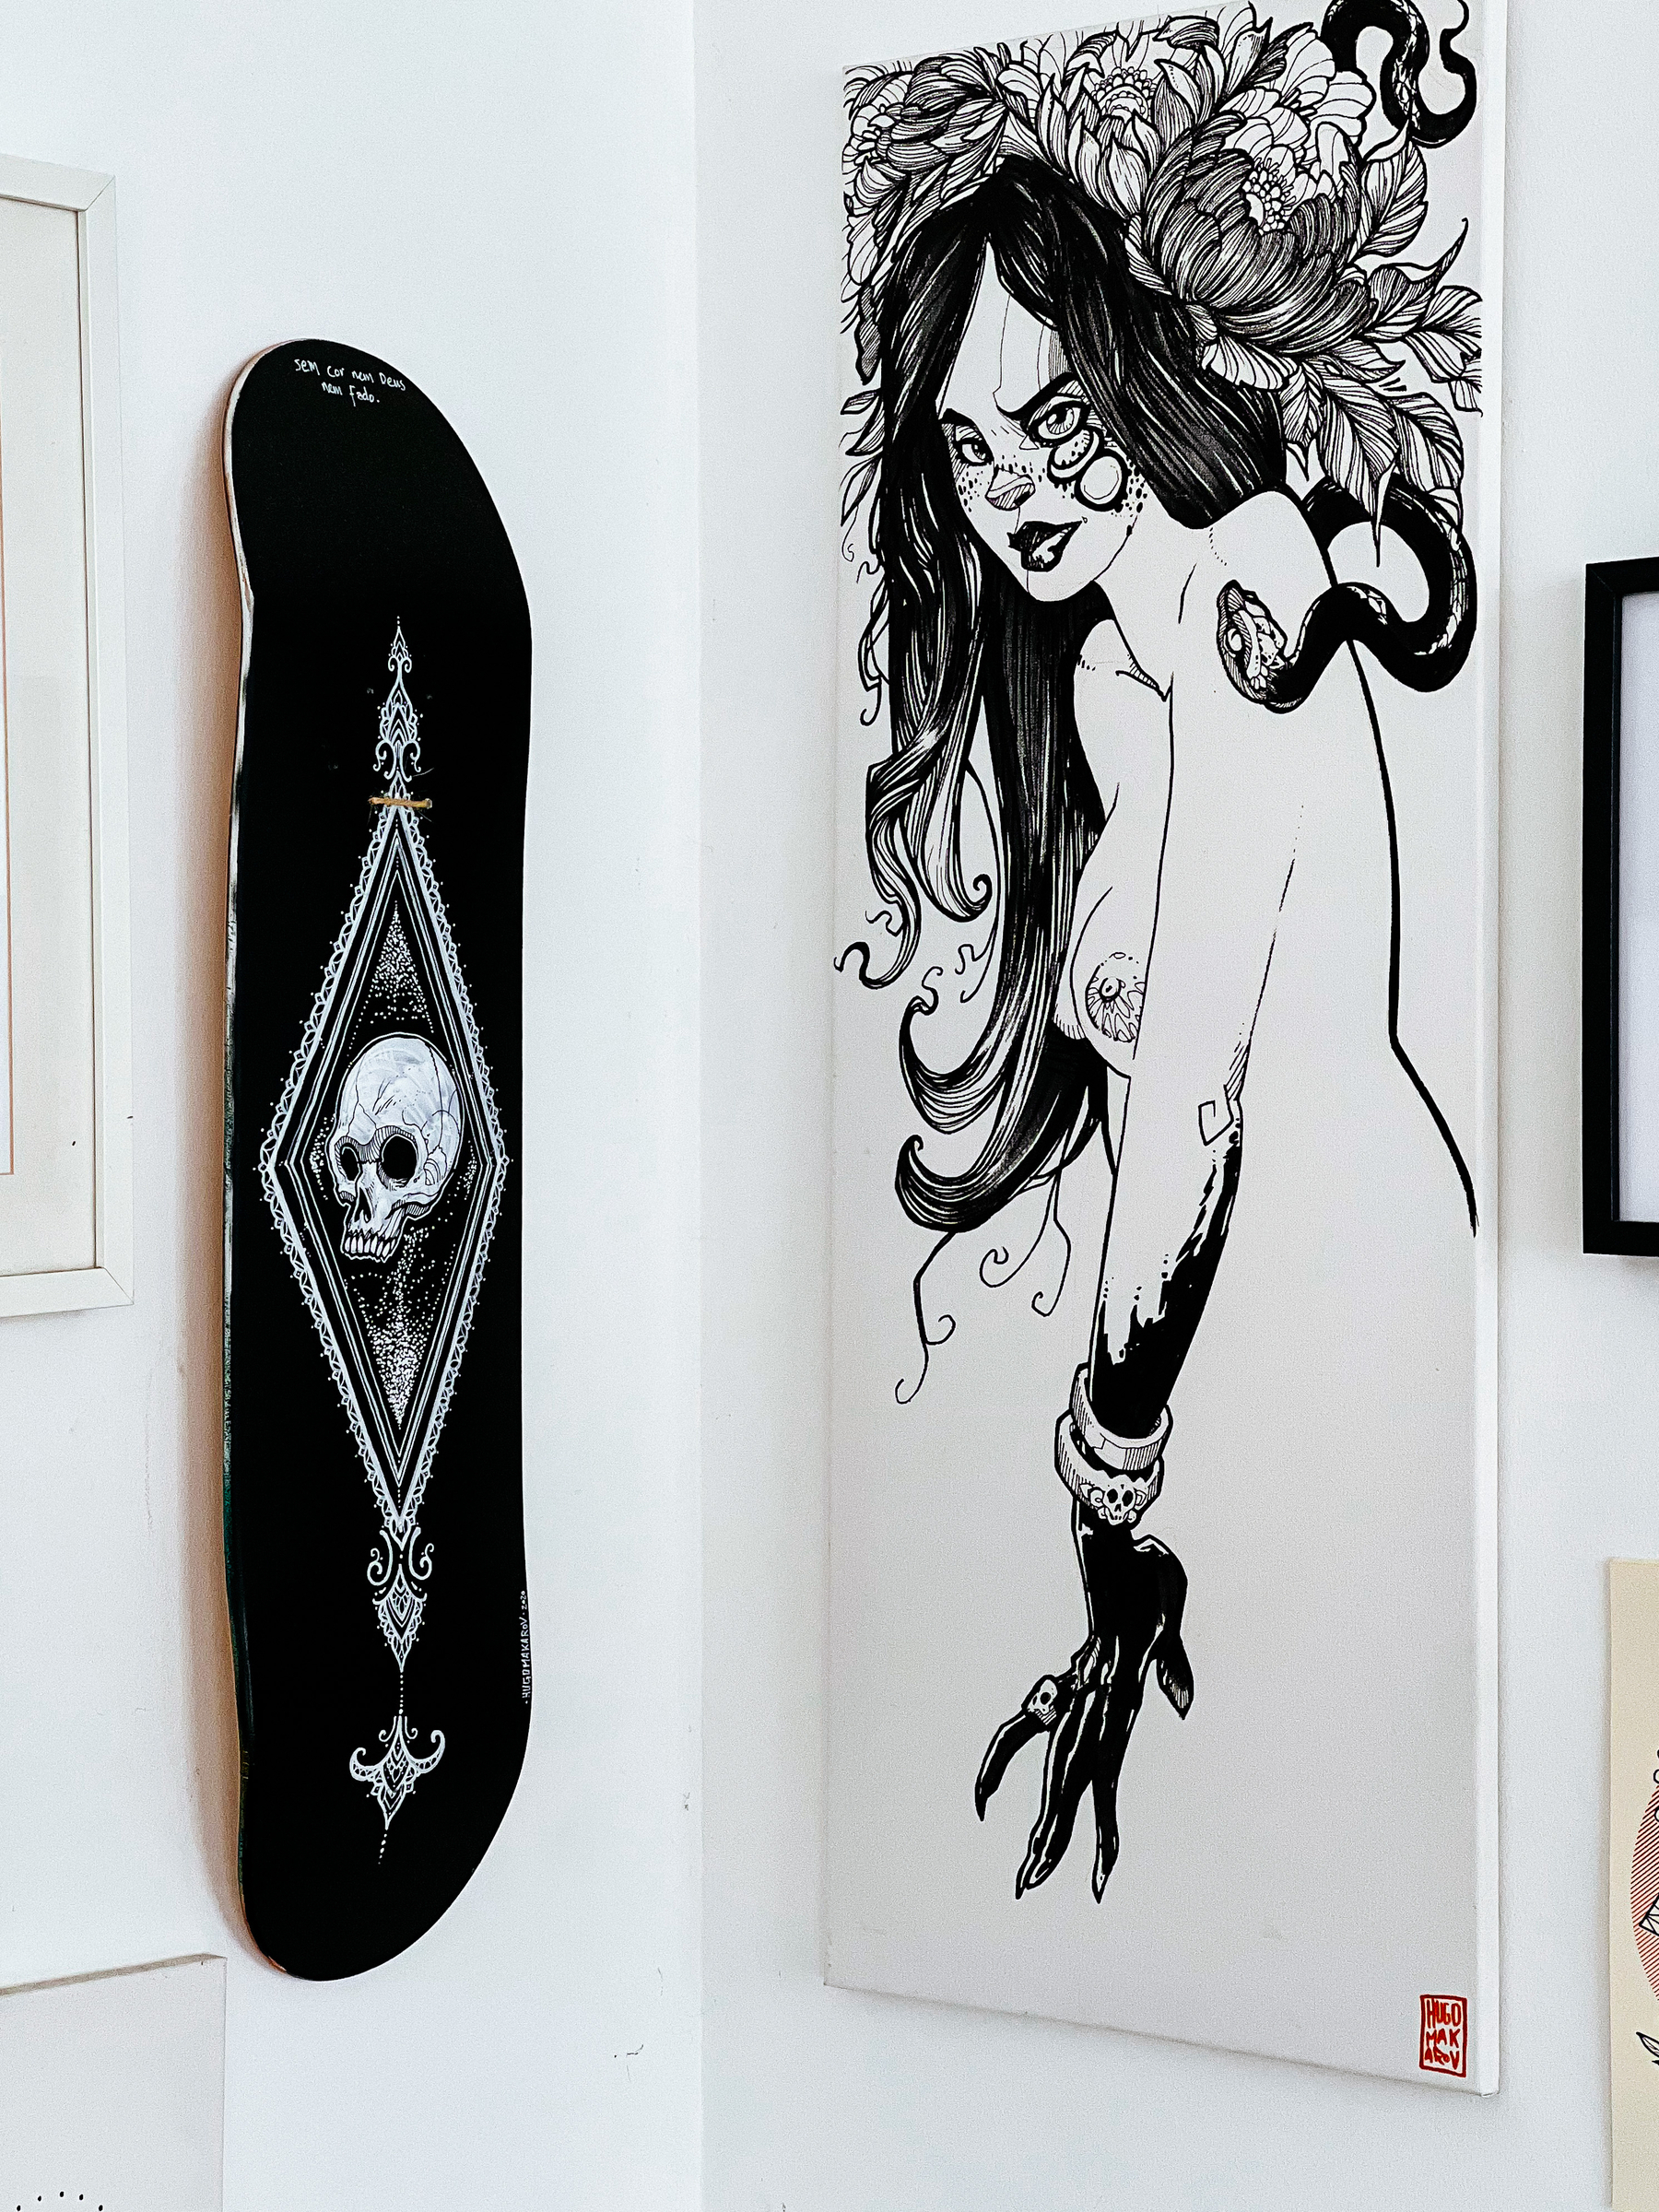 A skateboard and an illustration of a woman, on a wall. 